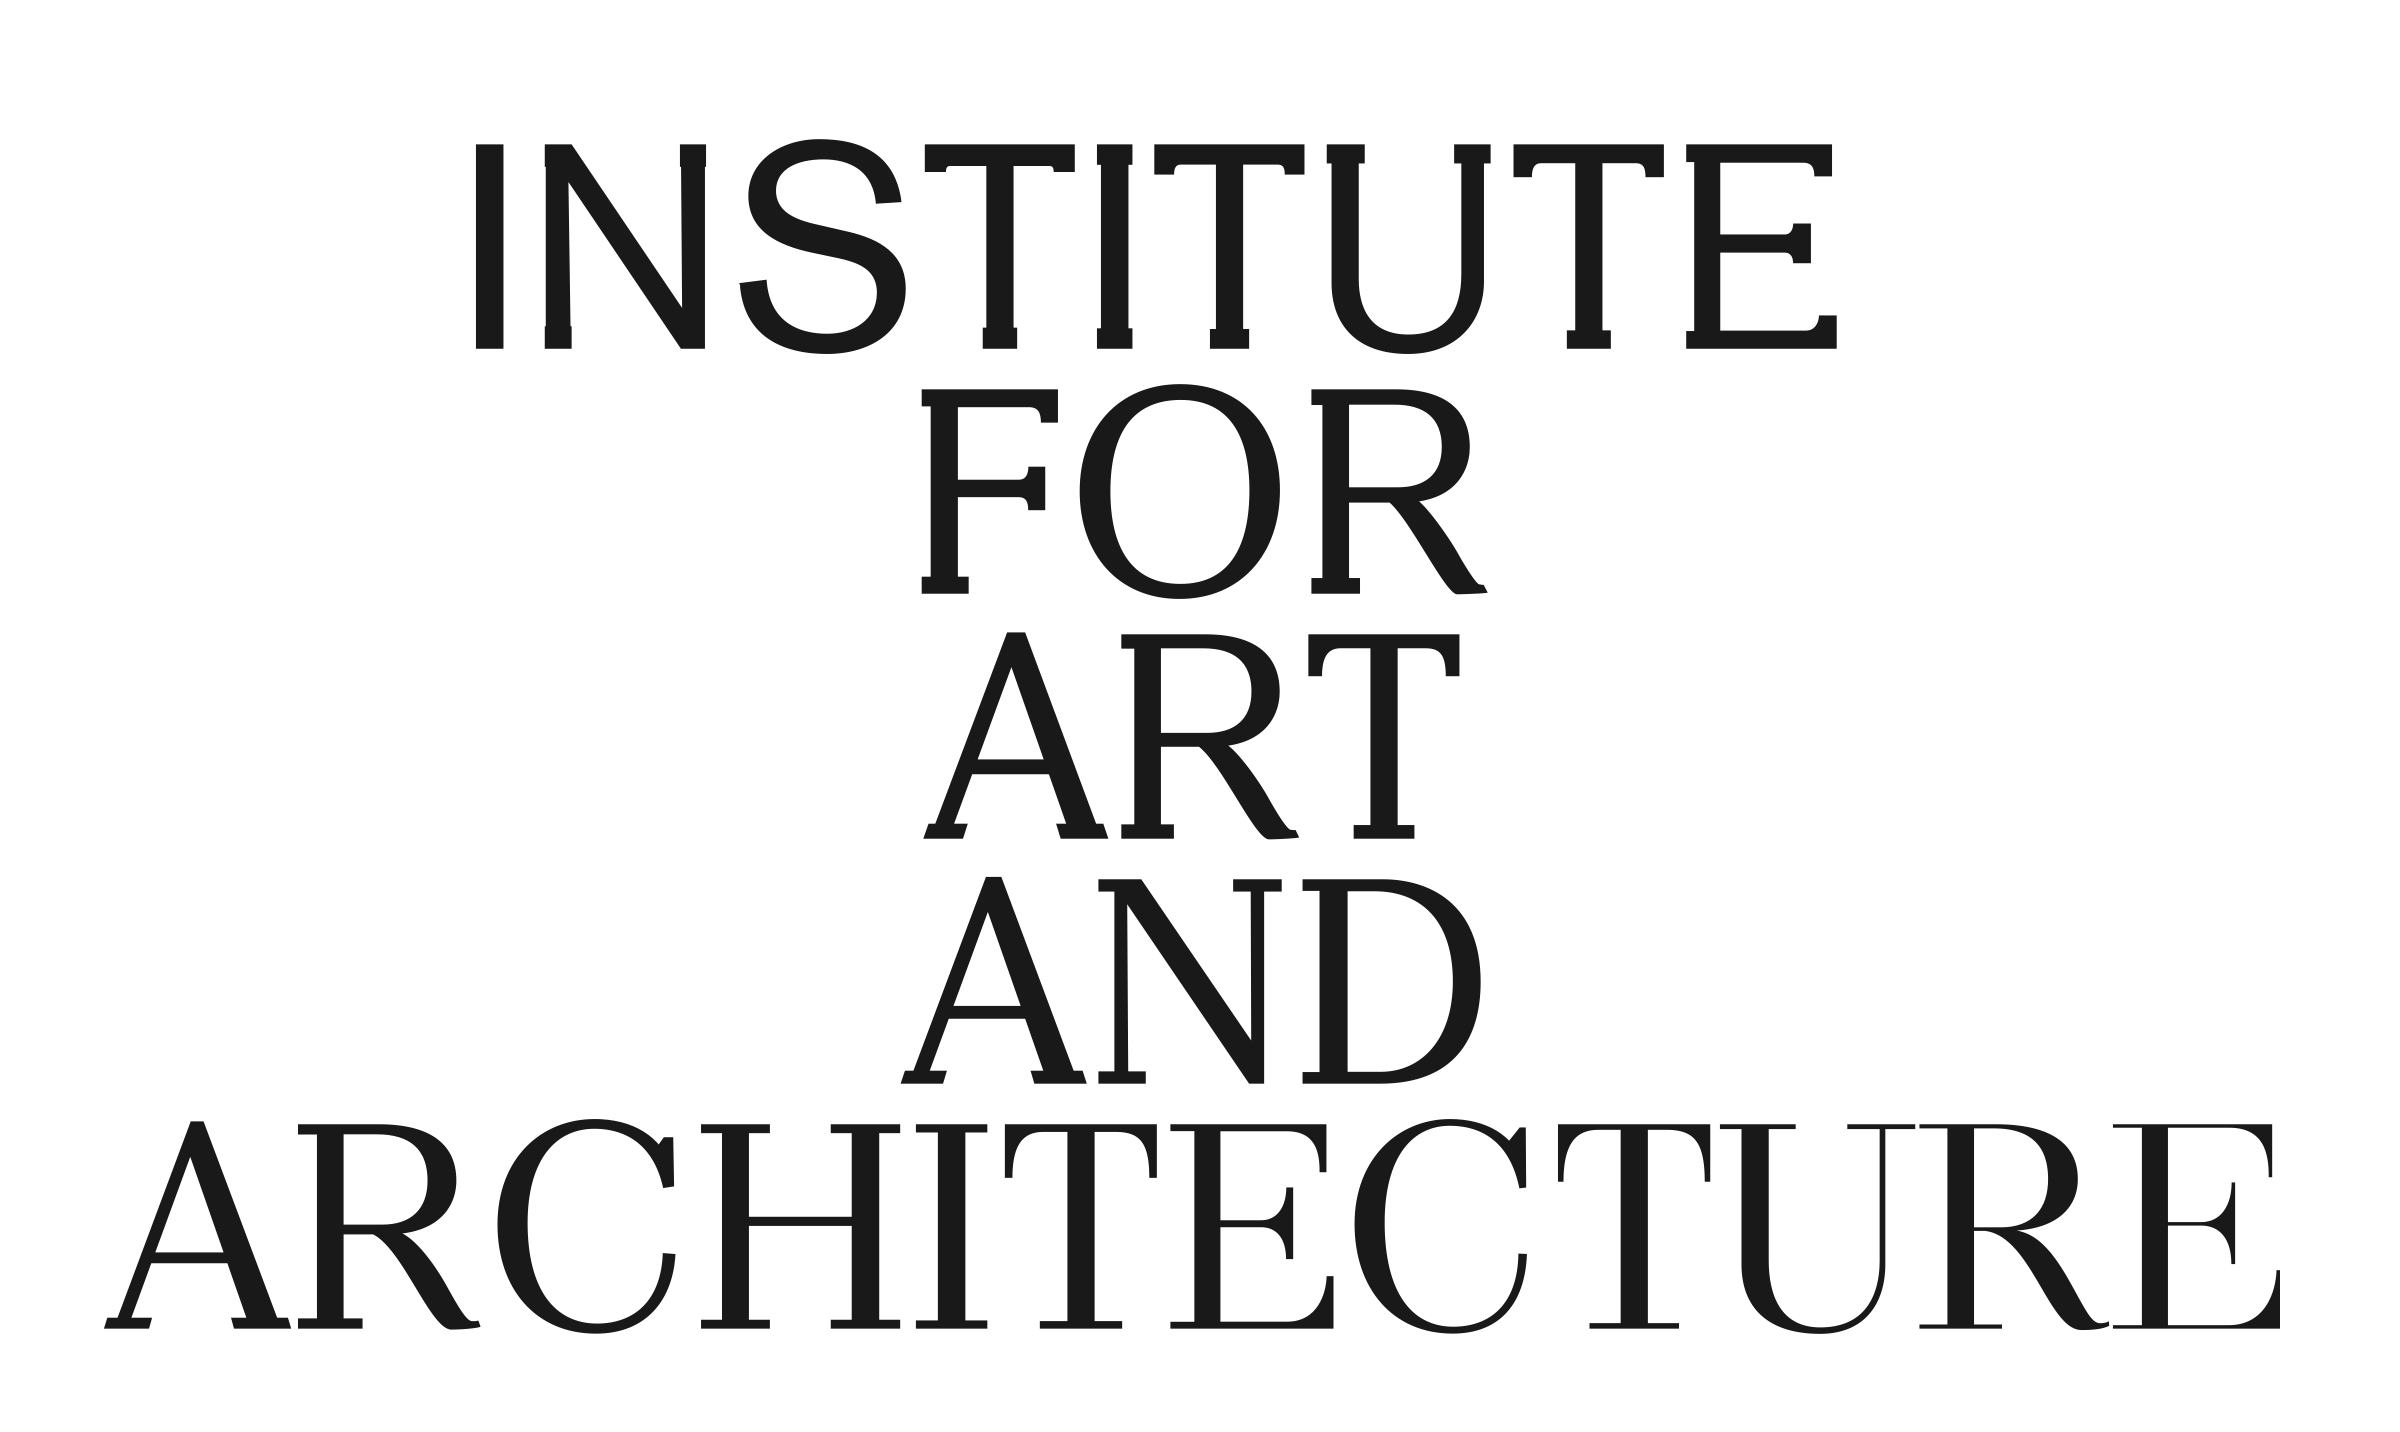 Institute for Art and Architecture